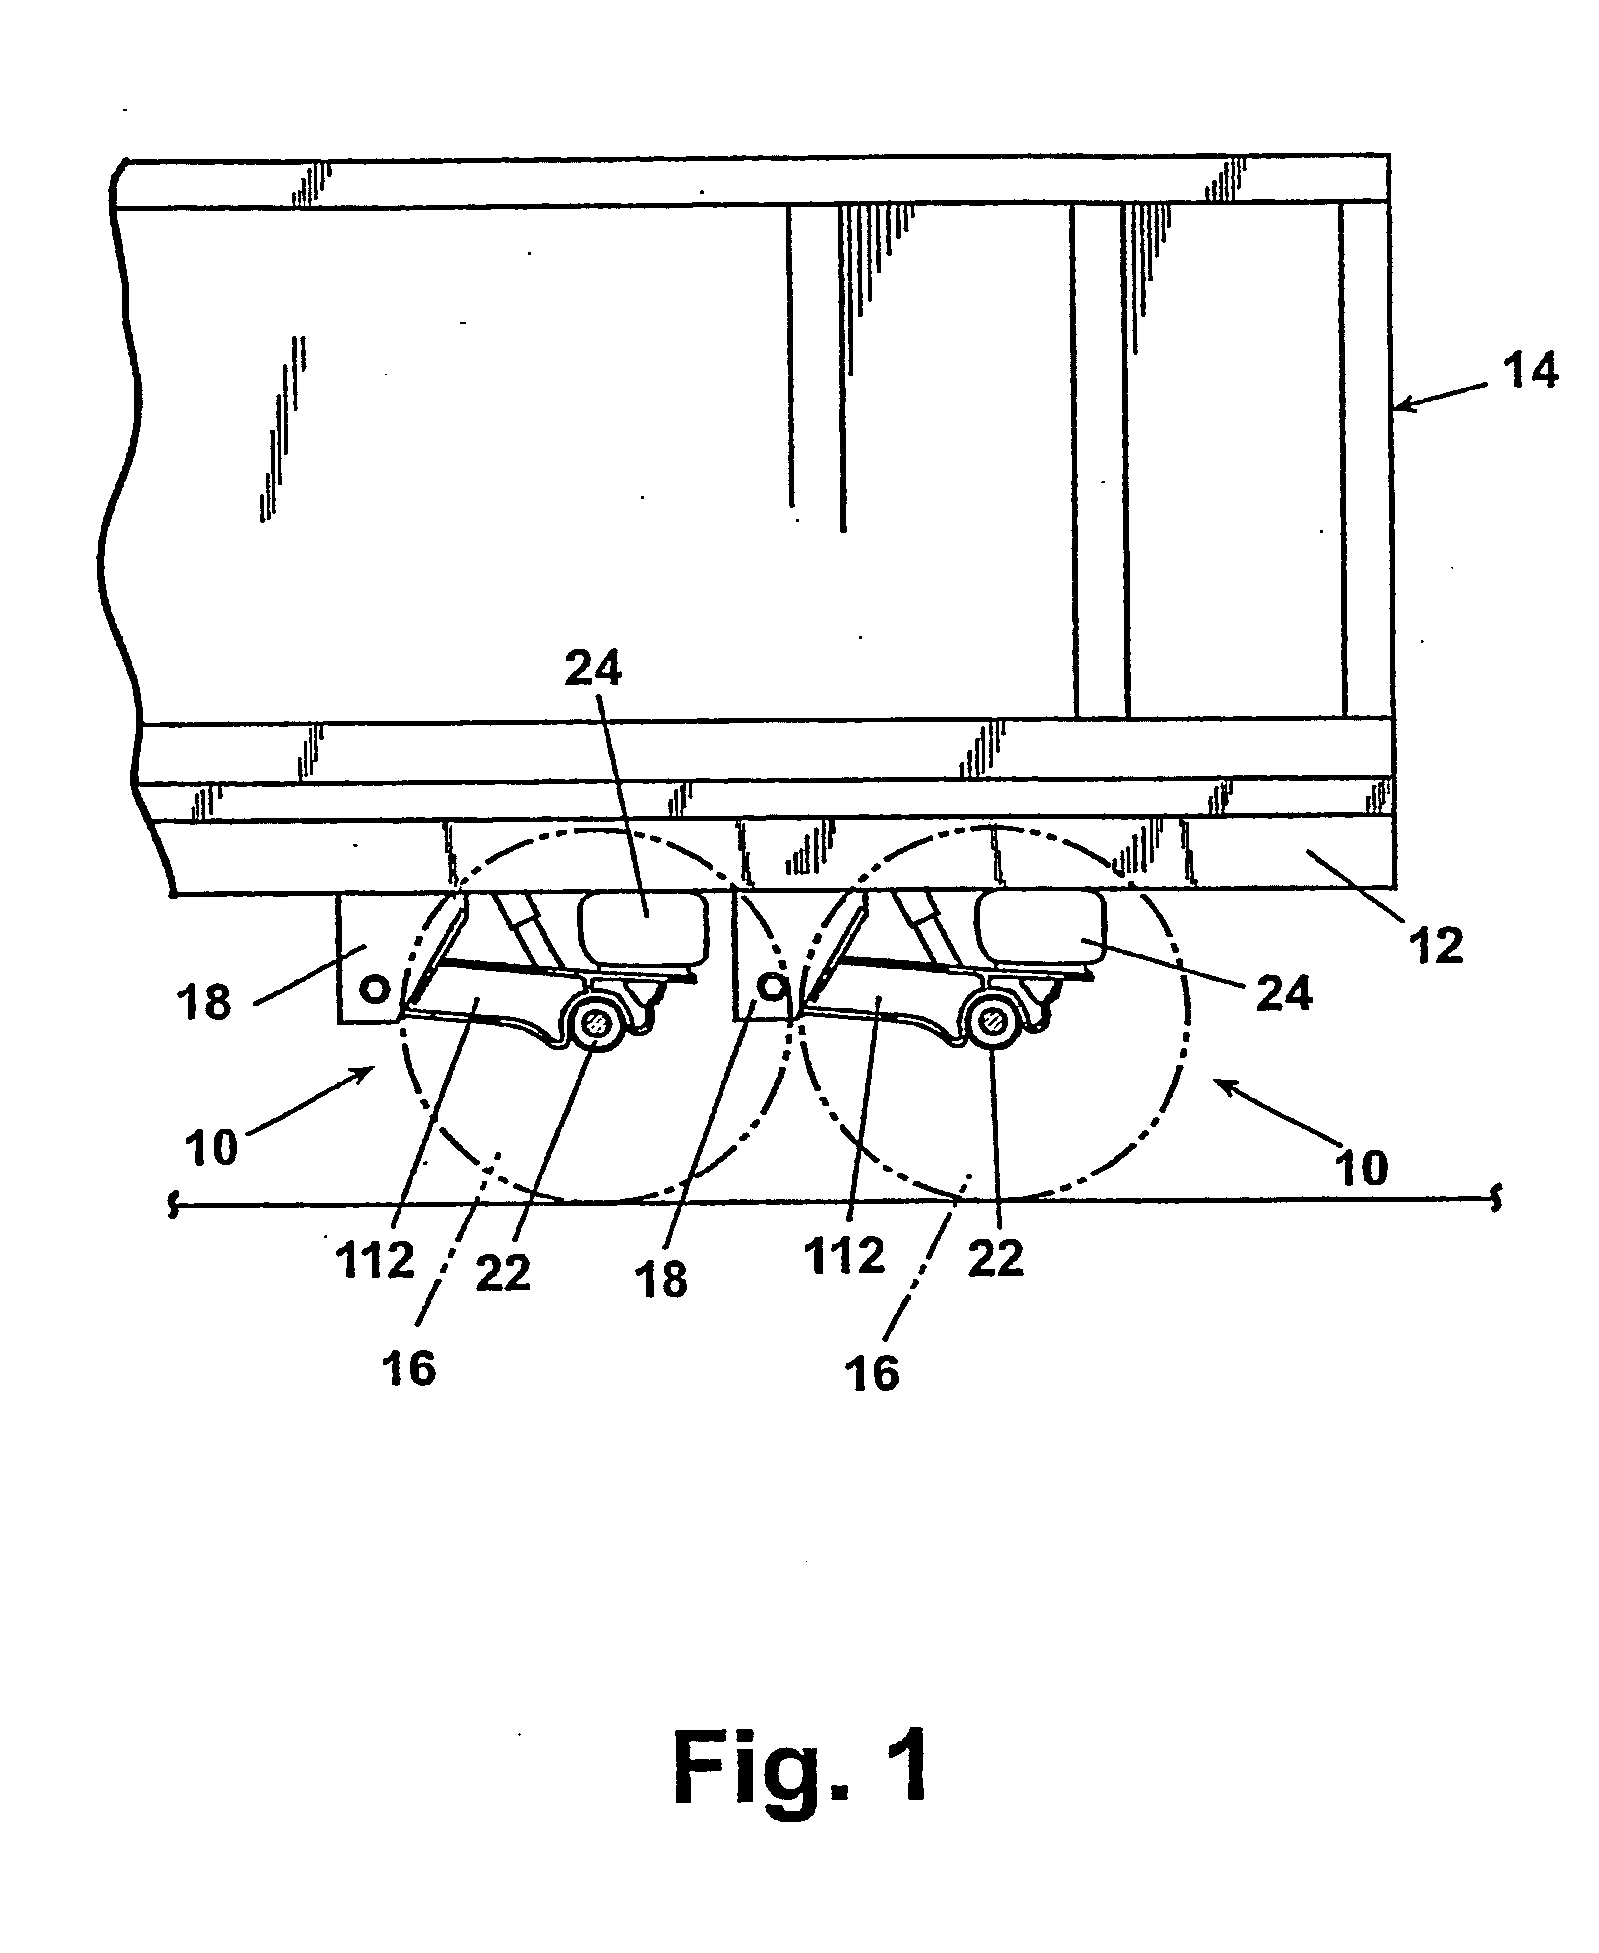 Trailing arm suspension with optimized i-beam